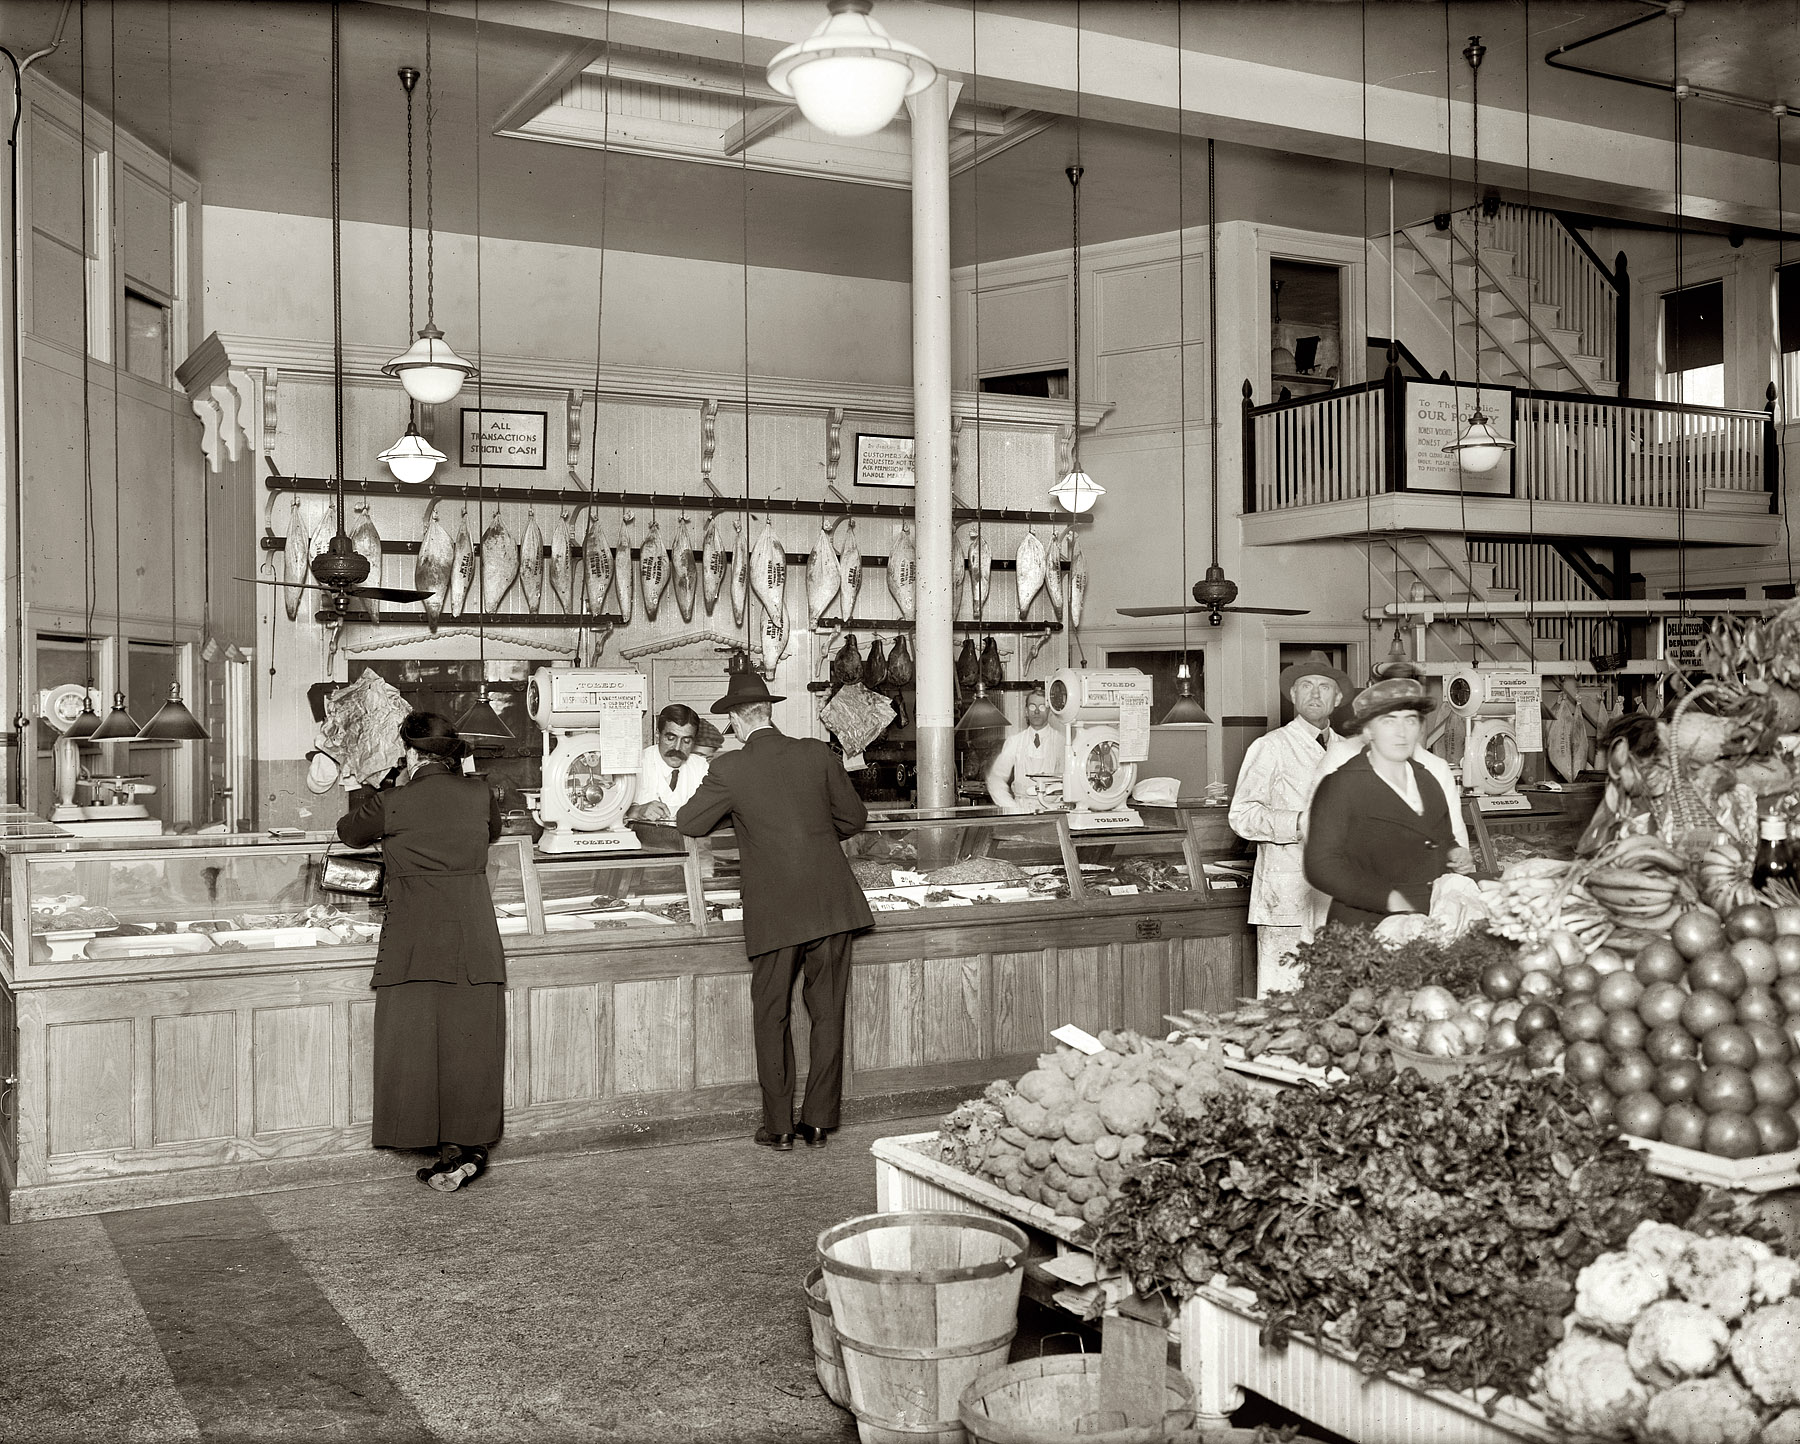 More of the Old Dutch Market in Washington circa 1920. View full size. National Photo Company Collection glass negative.